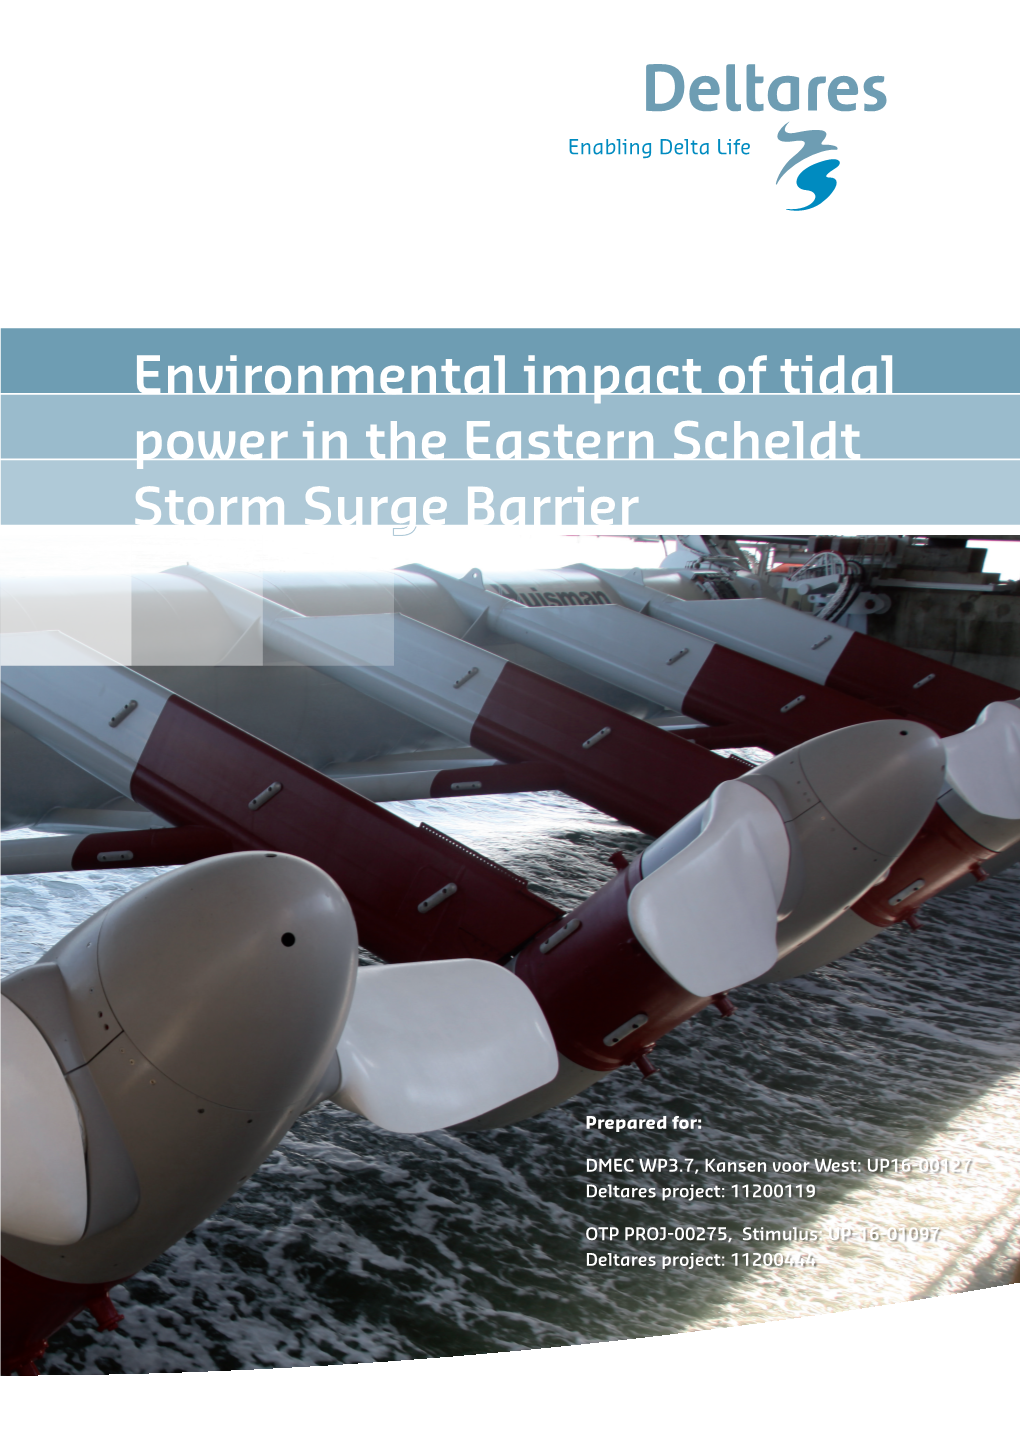 Environmental Impact of Tidal Power in the Eastern Scheldt Storm Surge Barrier